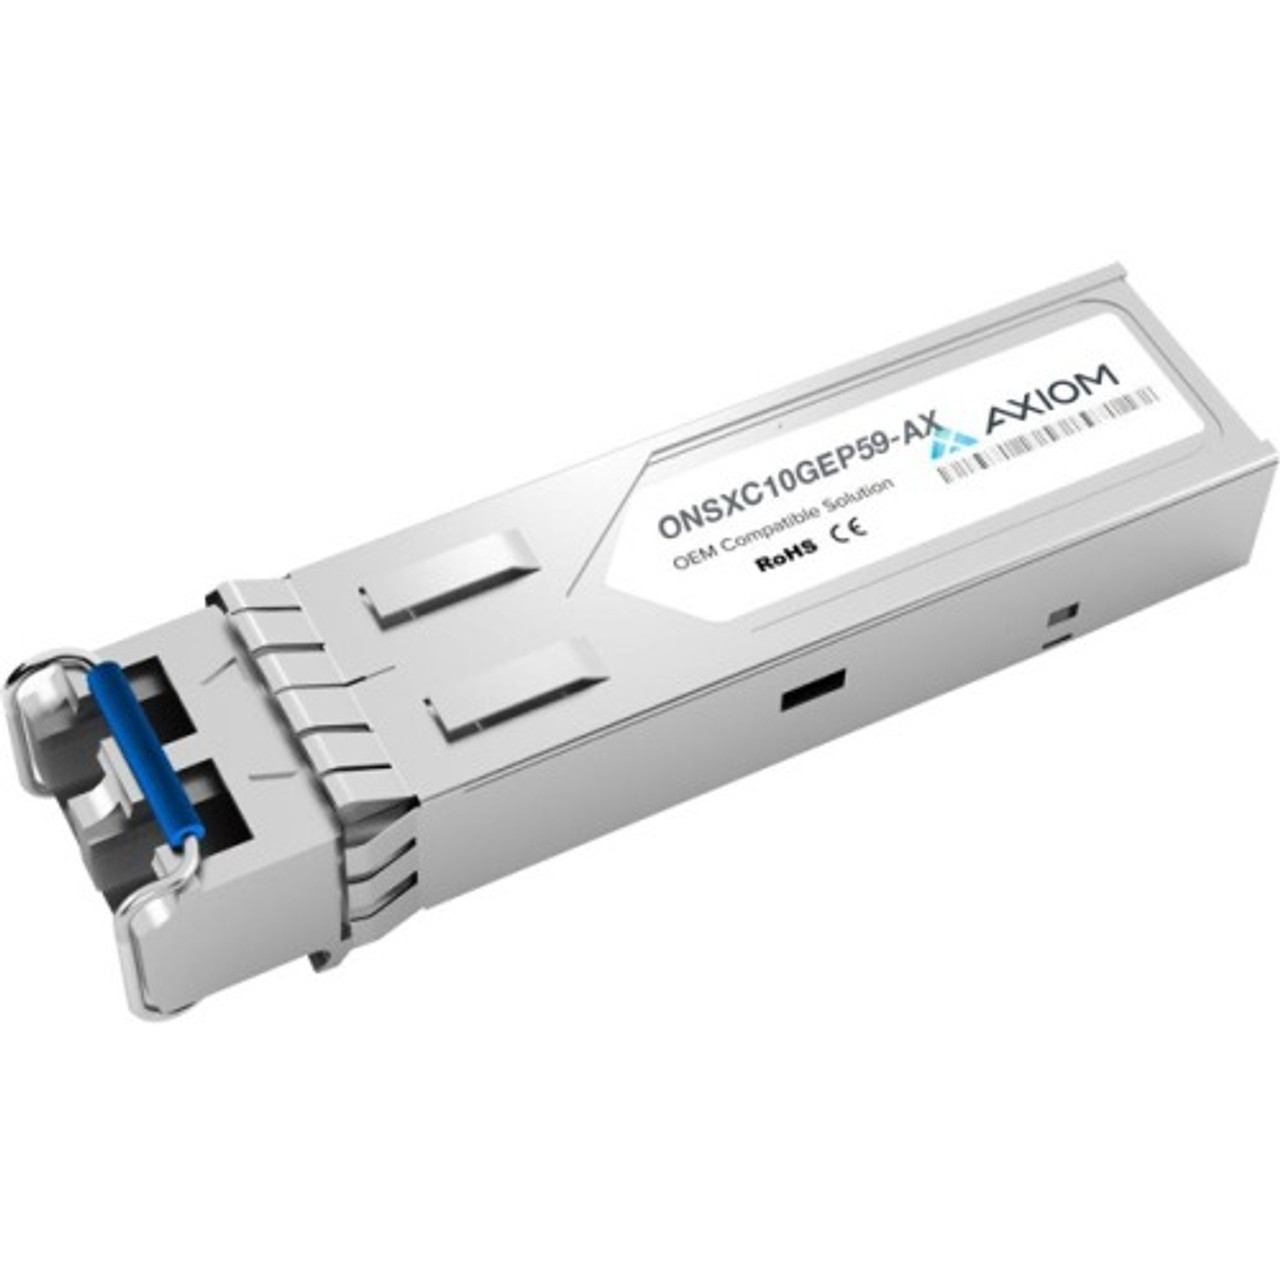 ONSXC10GEP59-AX Axiom 10Gbps 10GBase-DWDM OC-192/STM-64 Single-mode Fiber 50km 1559.79nm Duplex LC Connector XFP Transceiver Module for Cisco Compatible